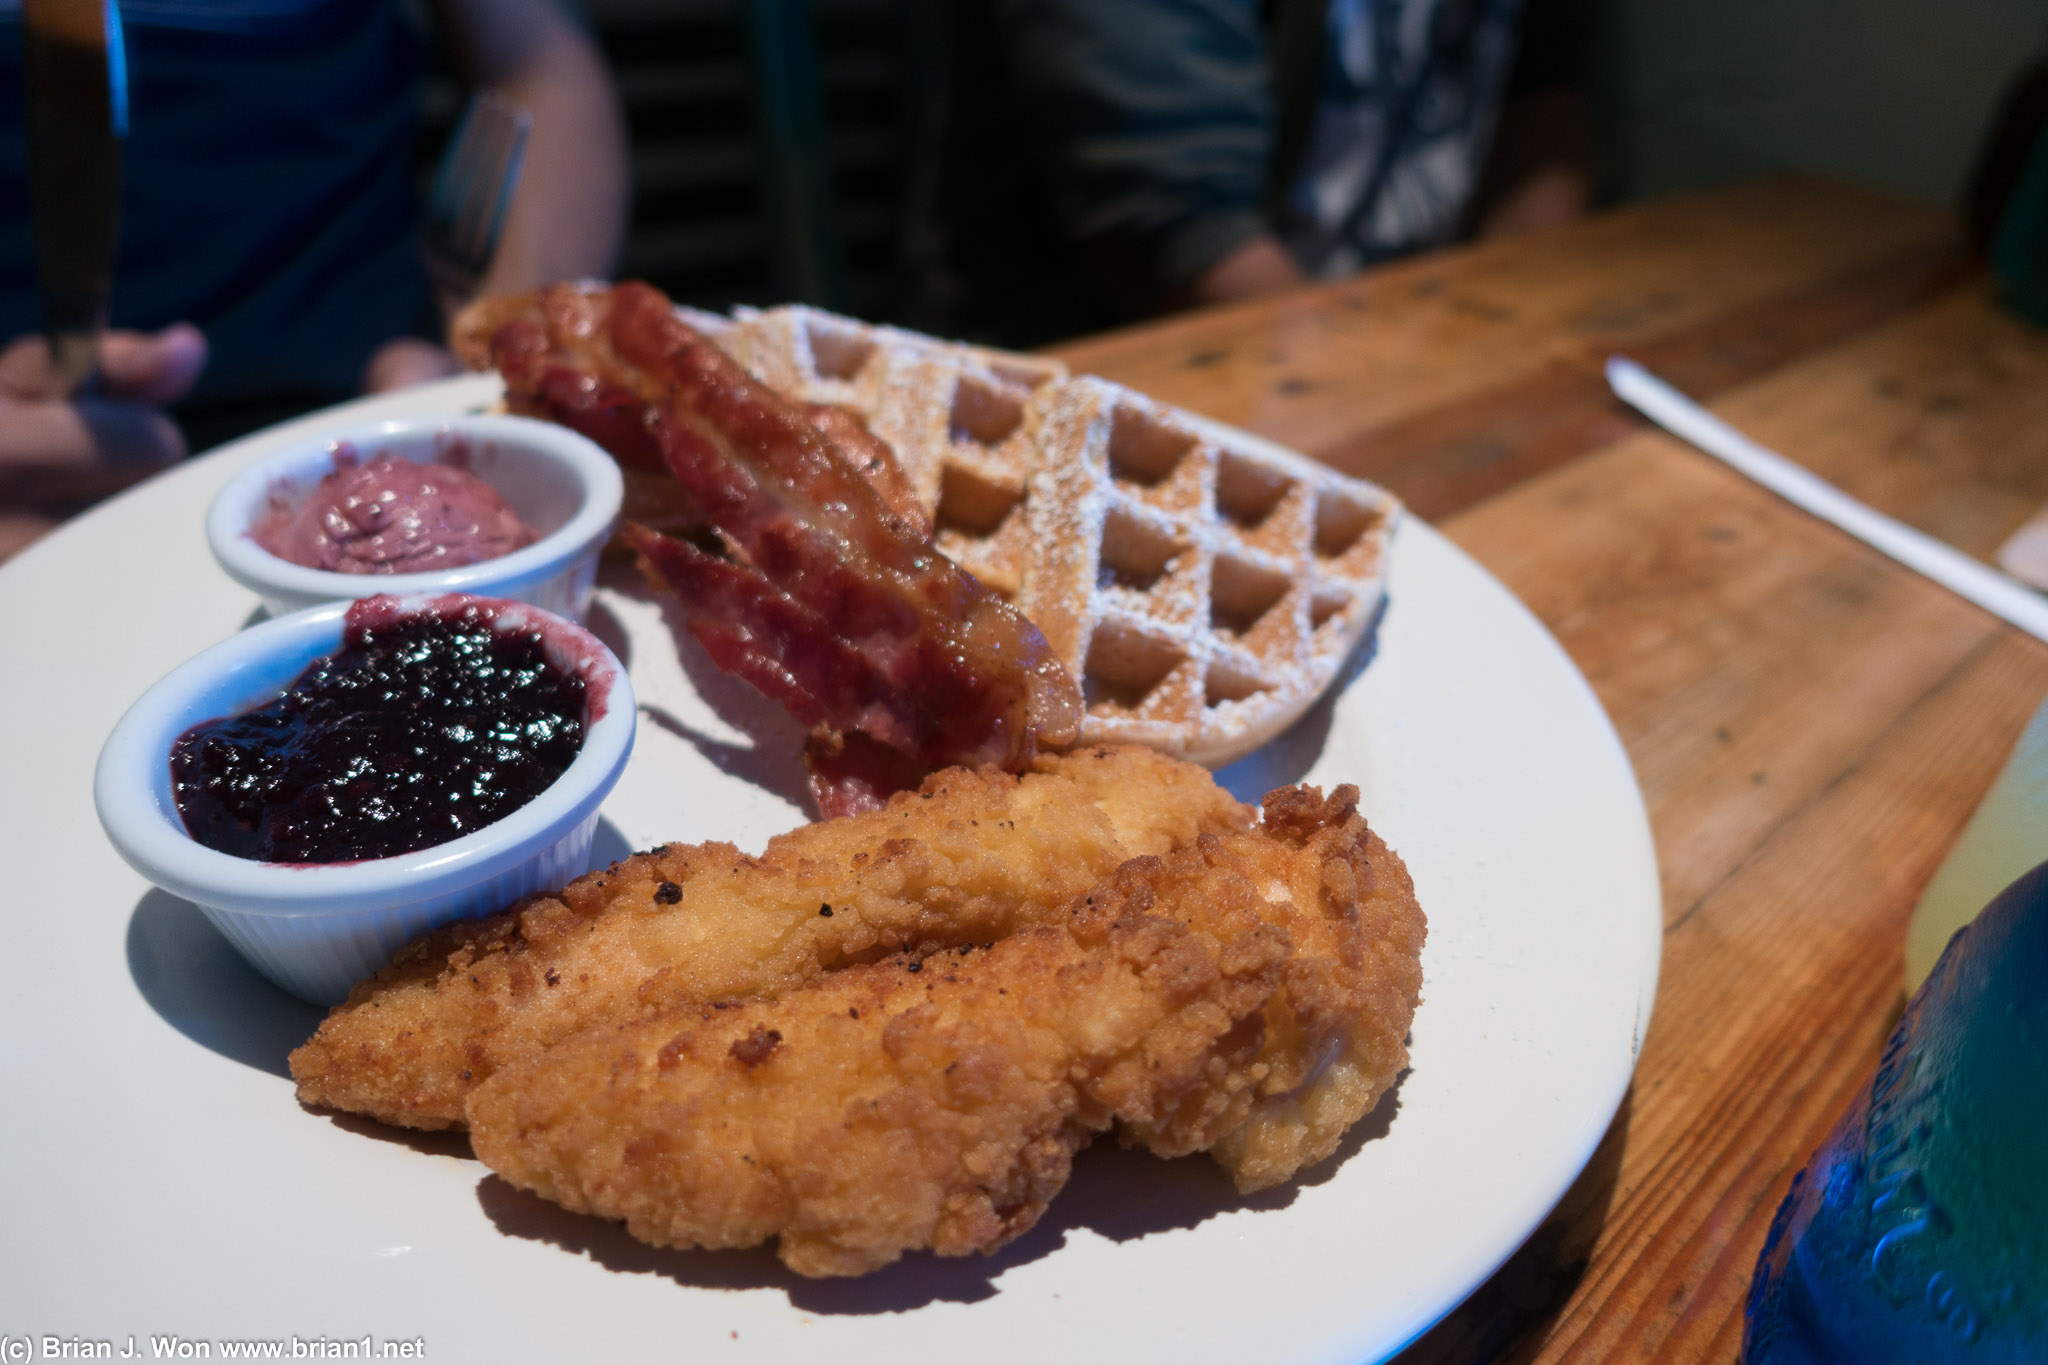 Fried chicken and waffles at The Pan.